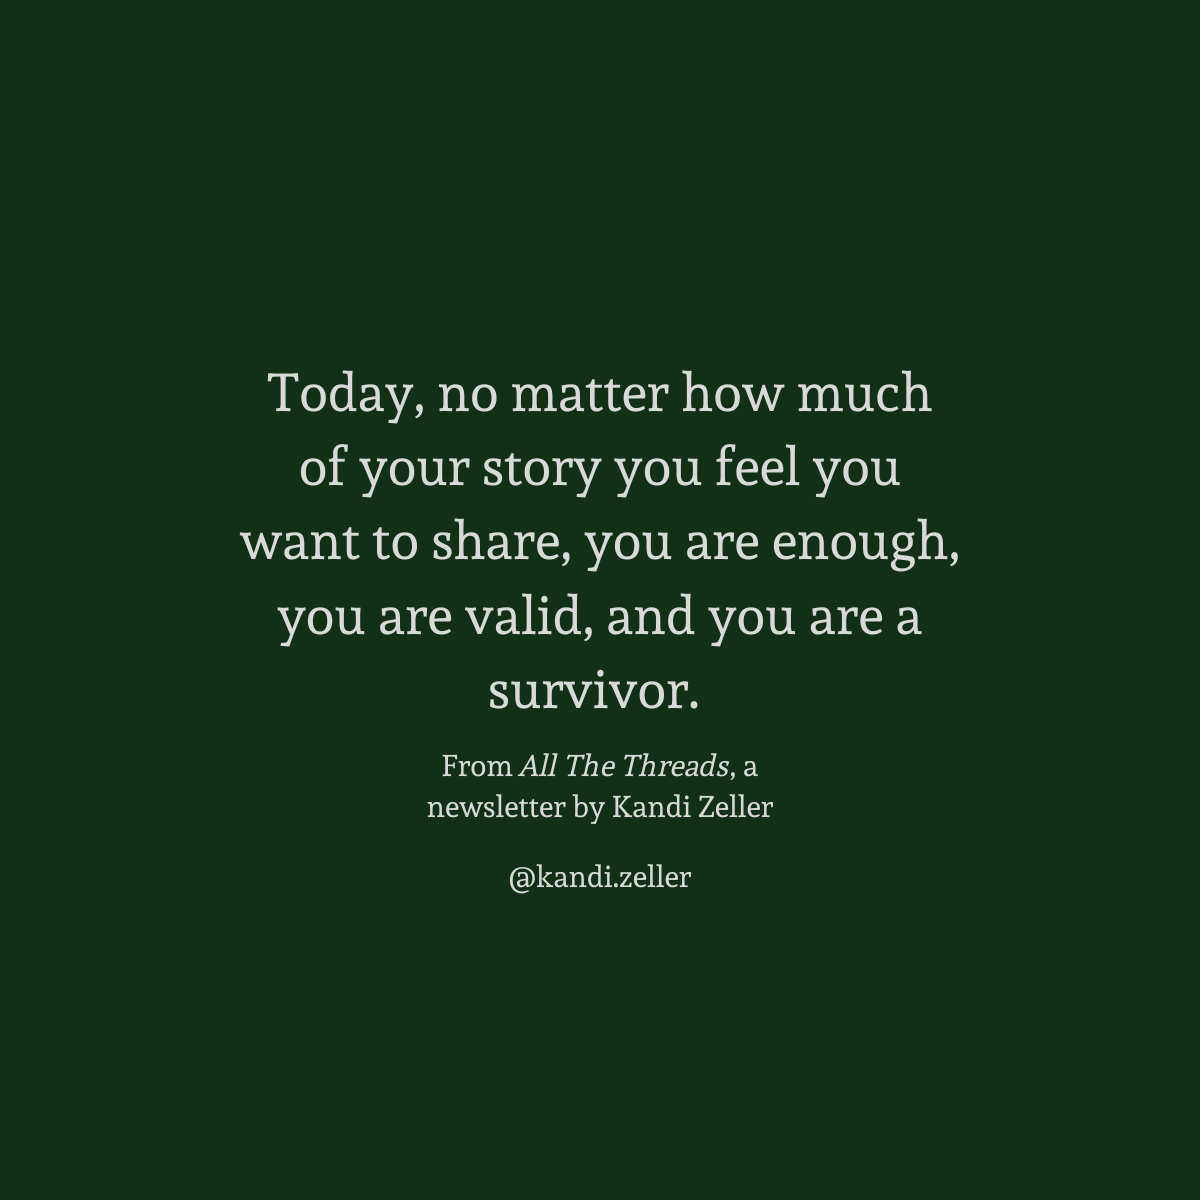 A dark green background with white lettering that reads, “Today, no matter how much of your story you feel you want to share, you are enough, you are valid, and you are a survivor.” This is followed by the words, “From All The Threads, a newsletter by Kandi Zeller, @Kandi.Zeller”